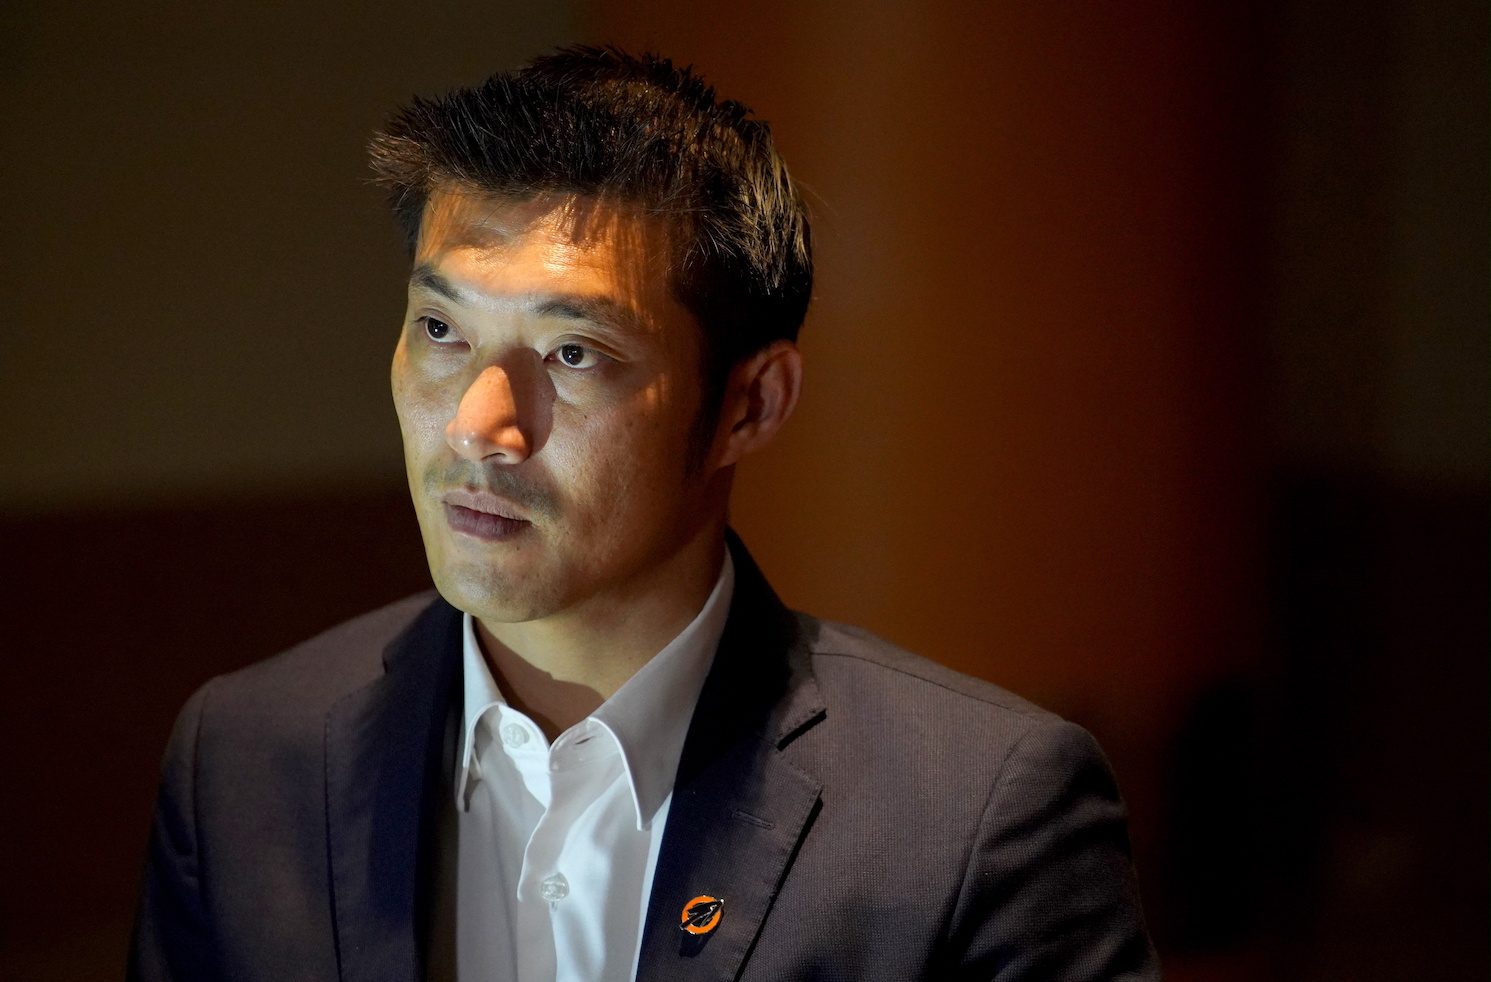 Thai opposition figure says government aims to silence him on vaccine